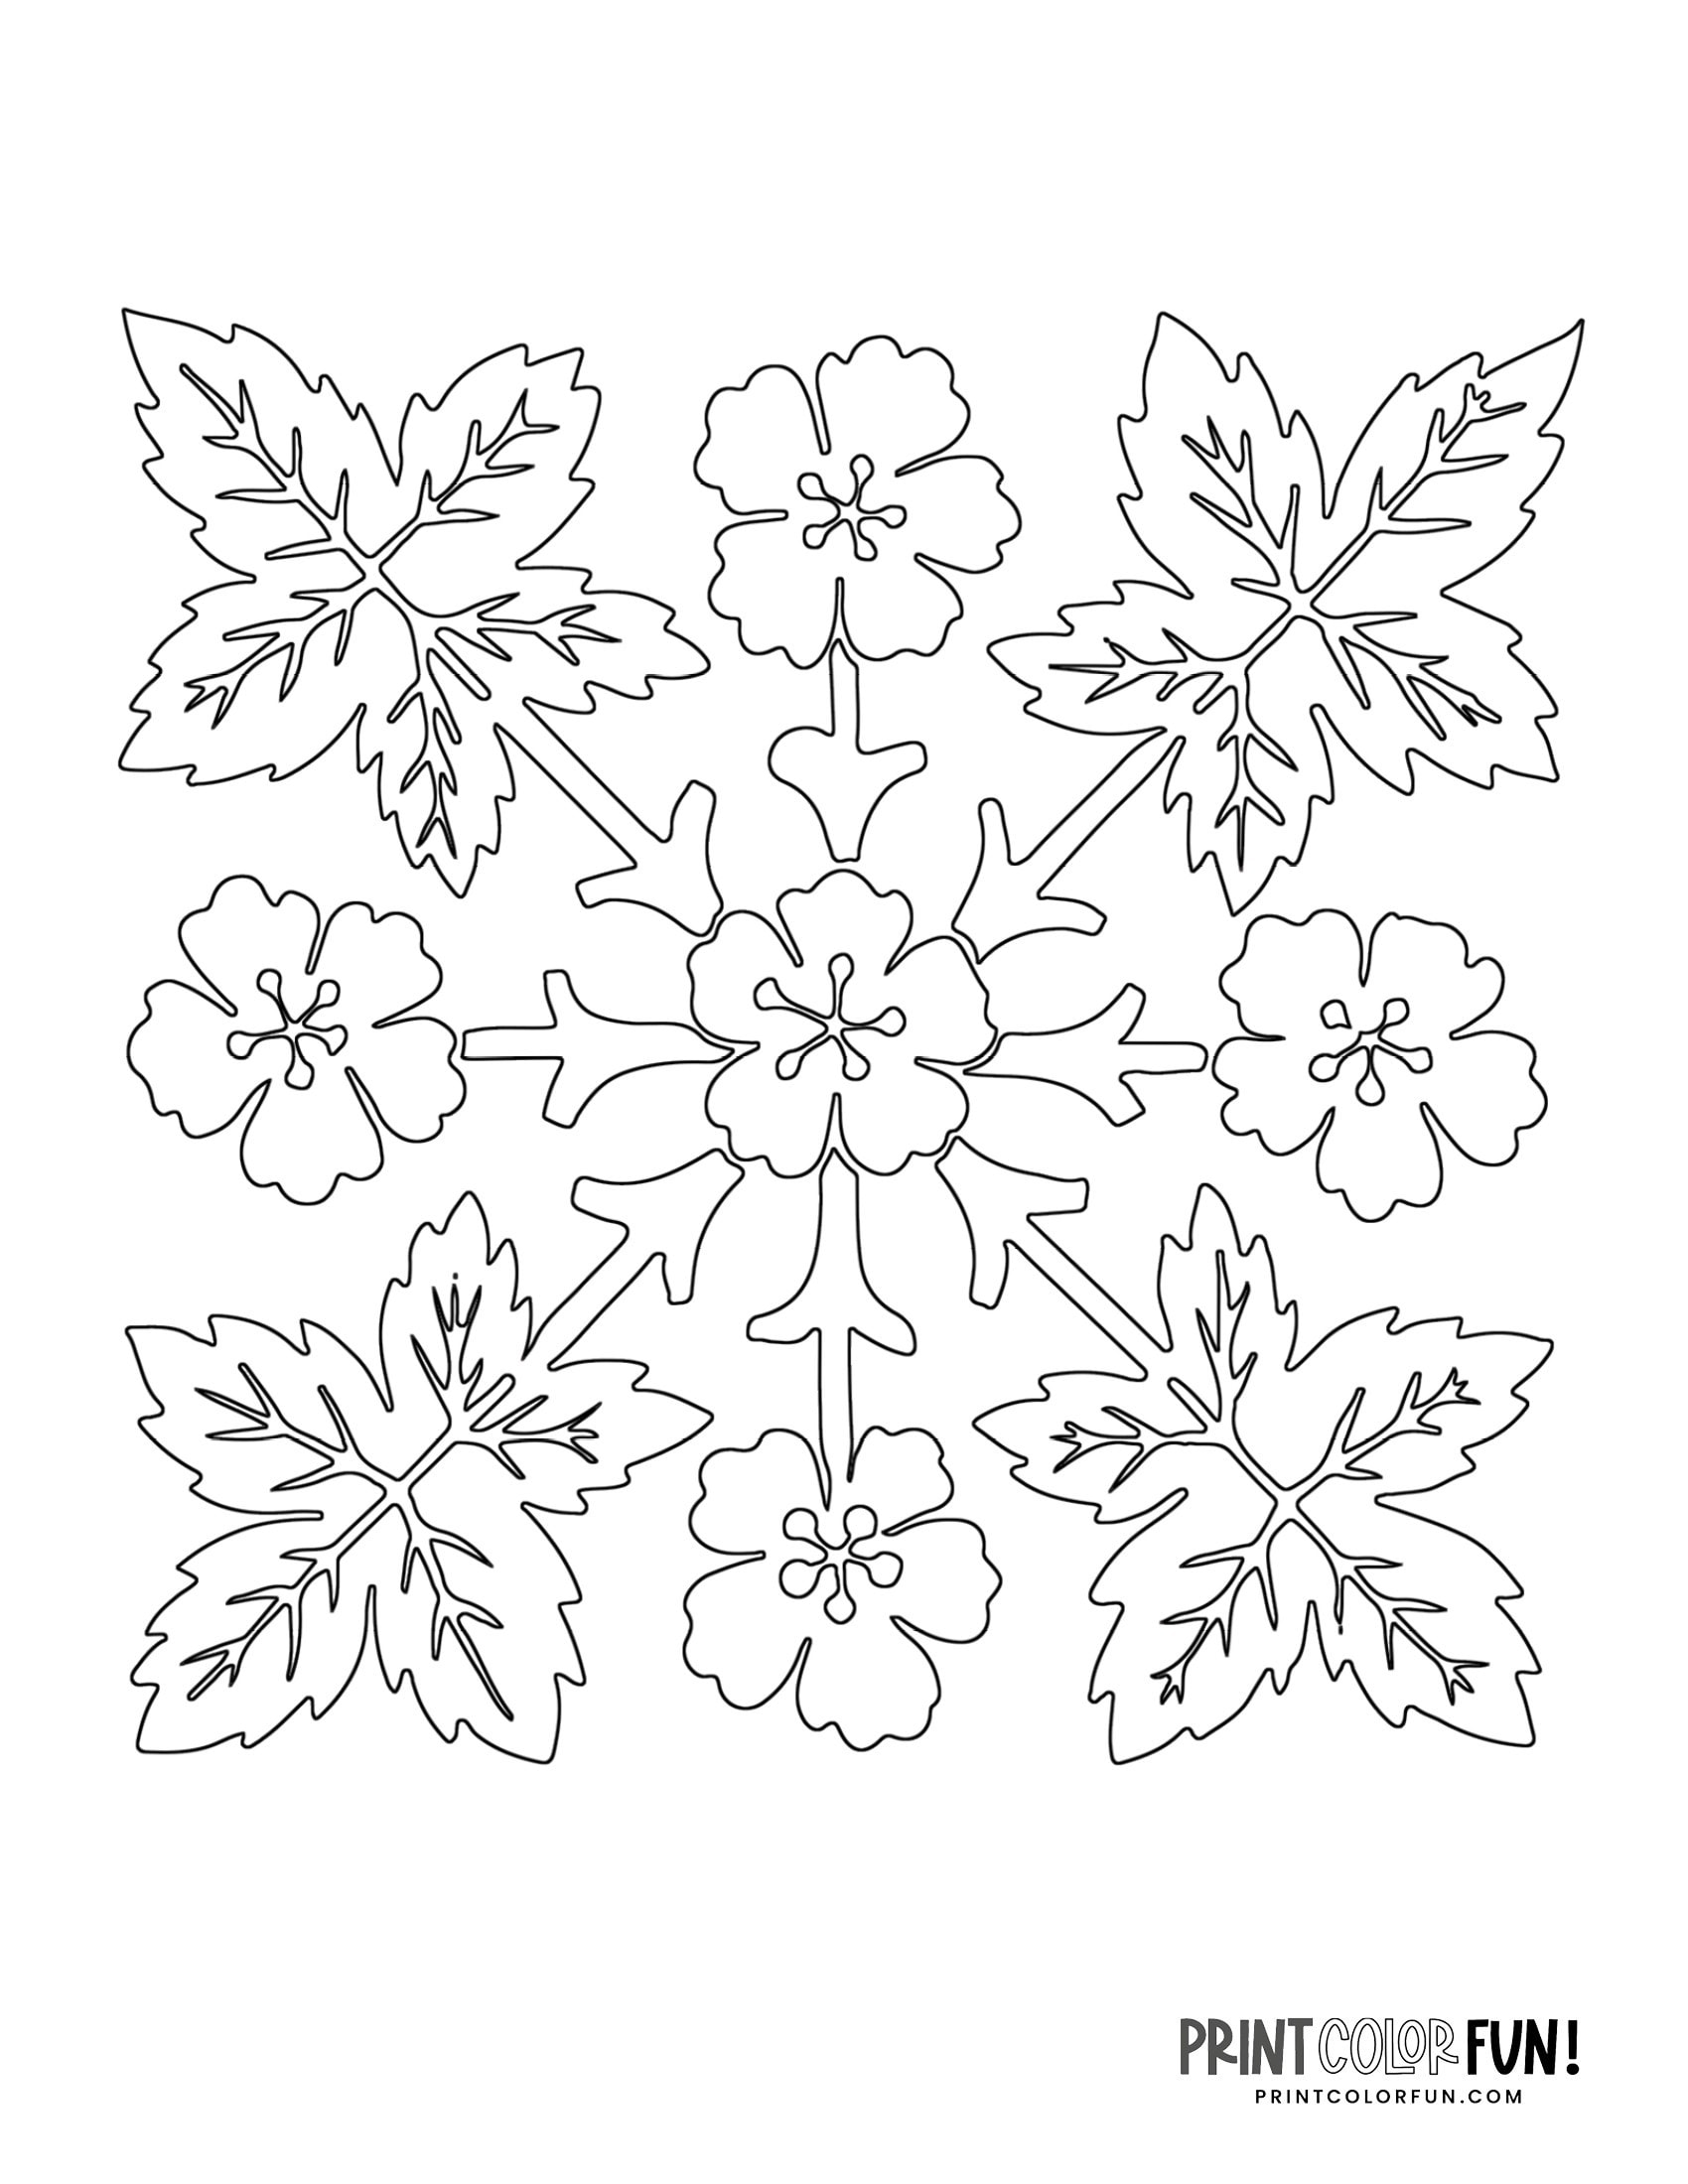 free-hawaiian-quilt-patterns-to-applique-or-stencil-print-color-fun